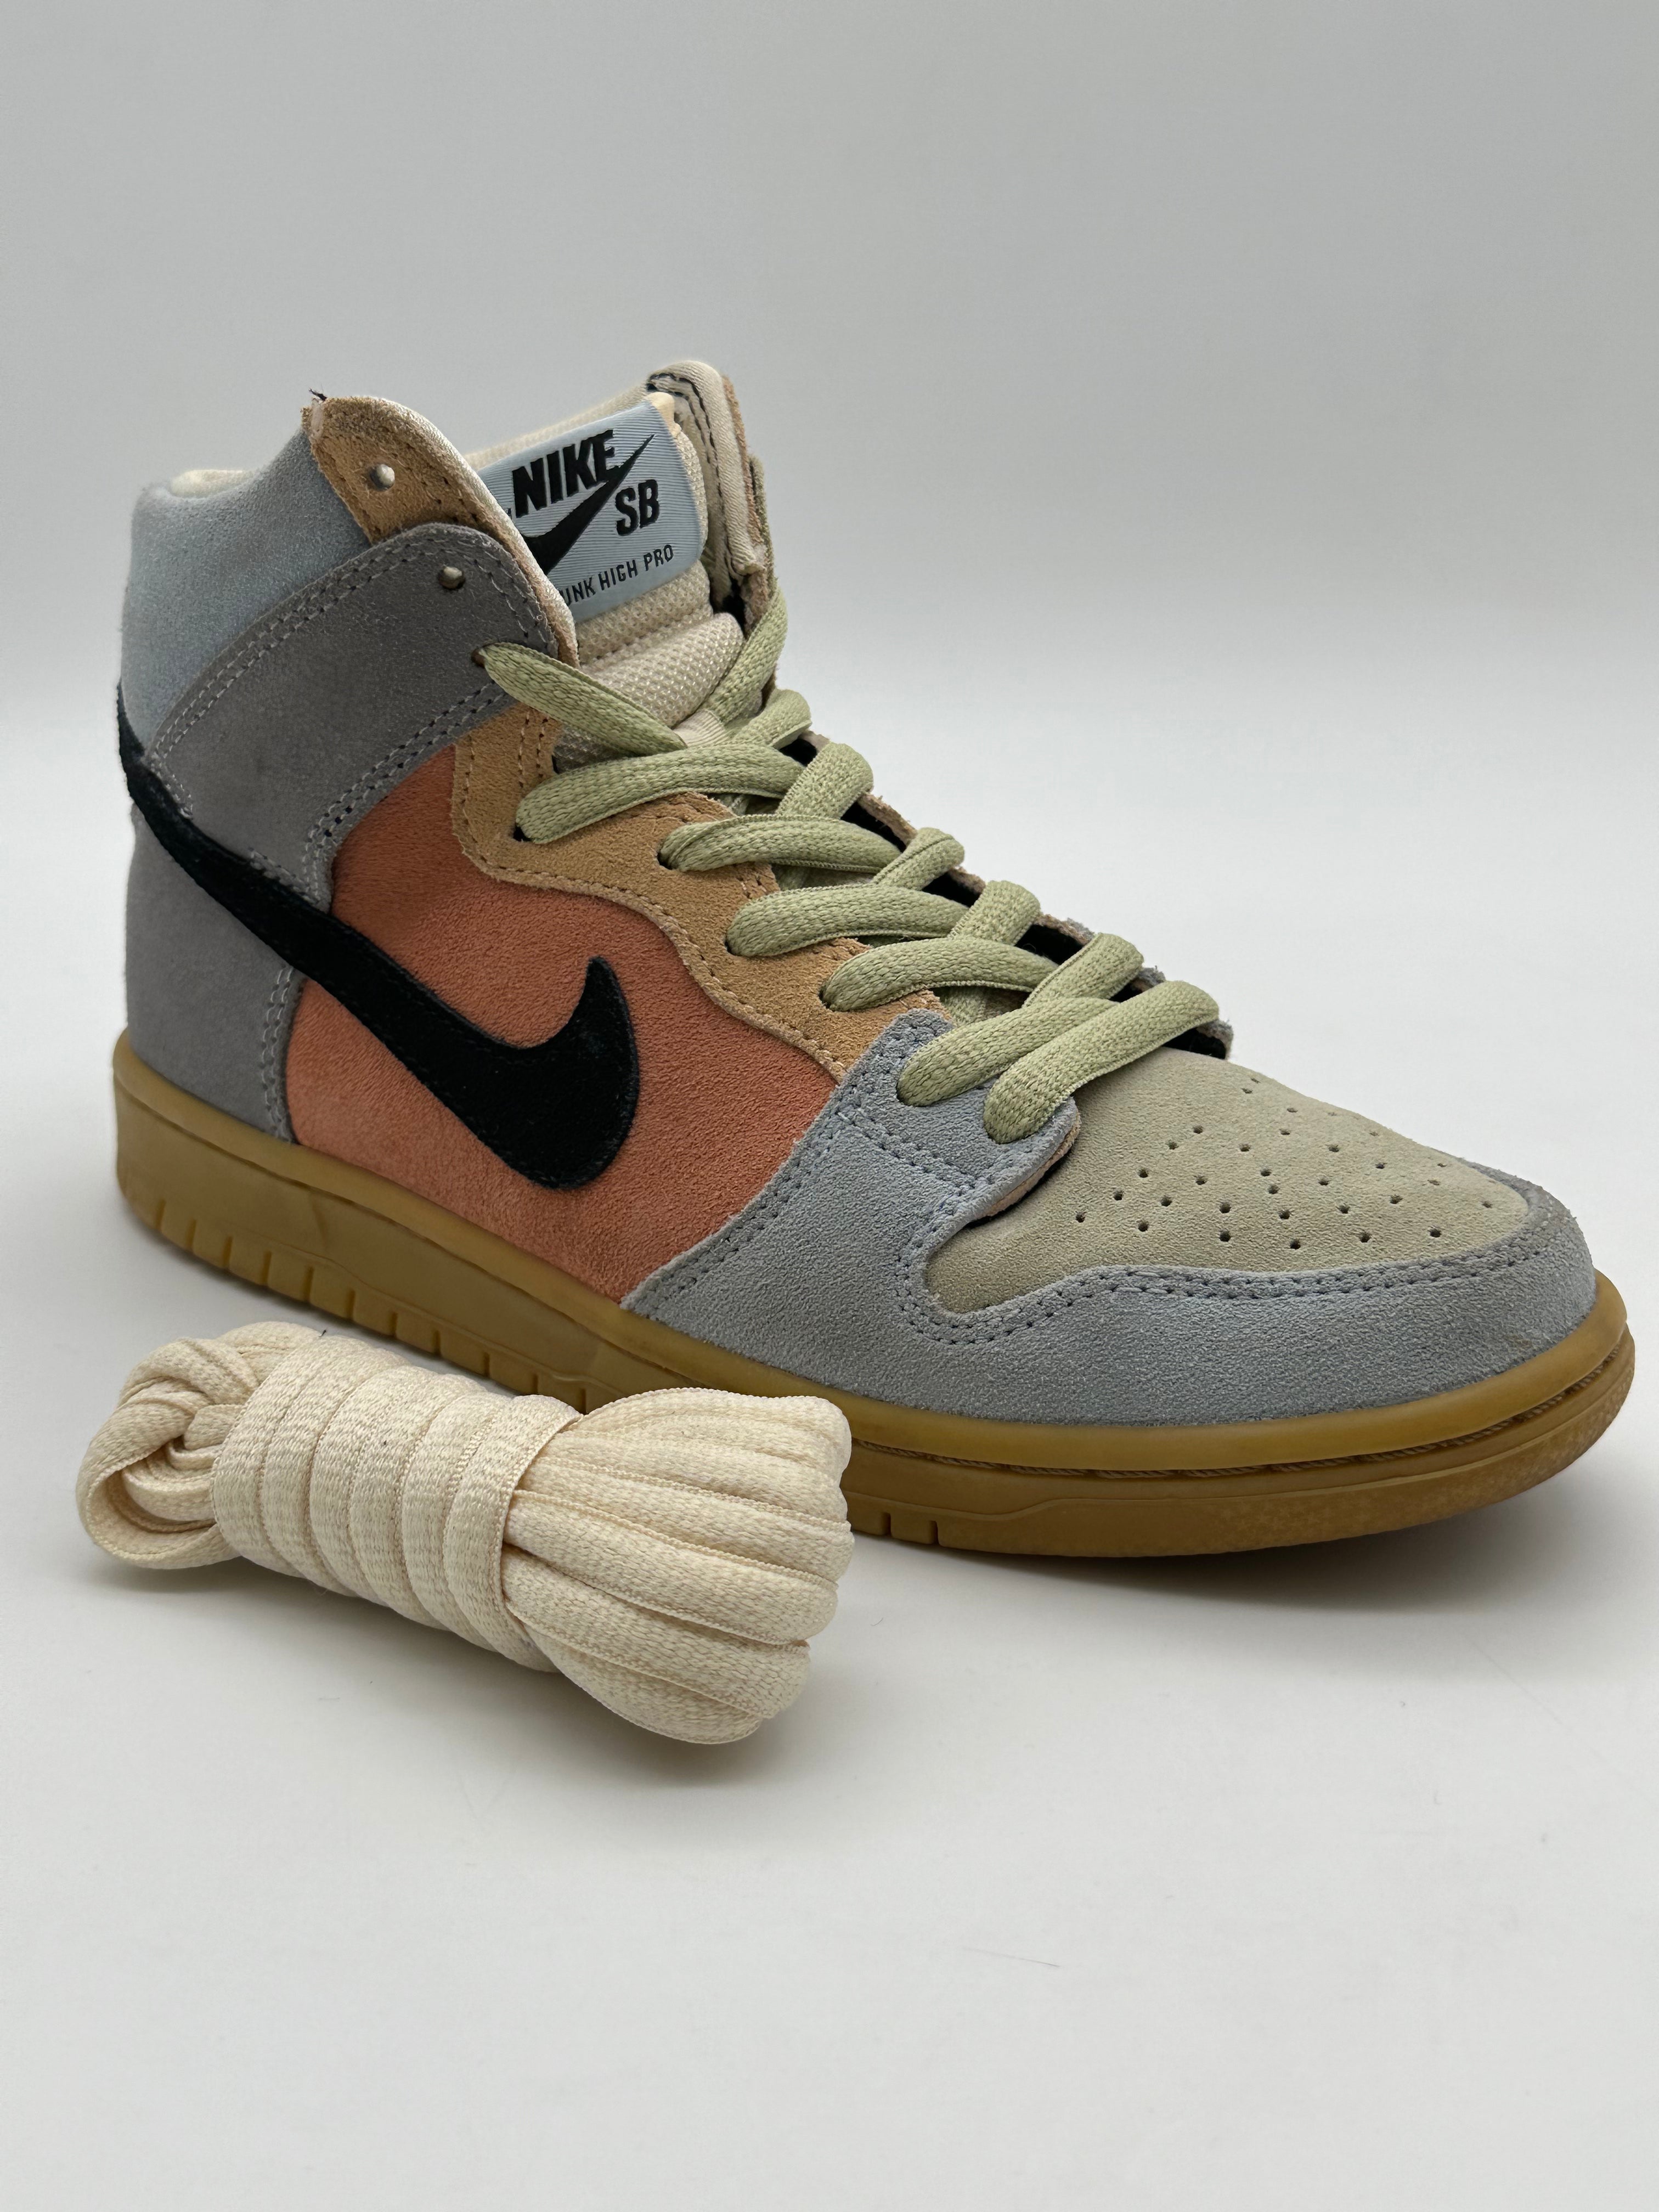 Suede Dunk High Sneakers